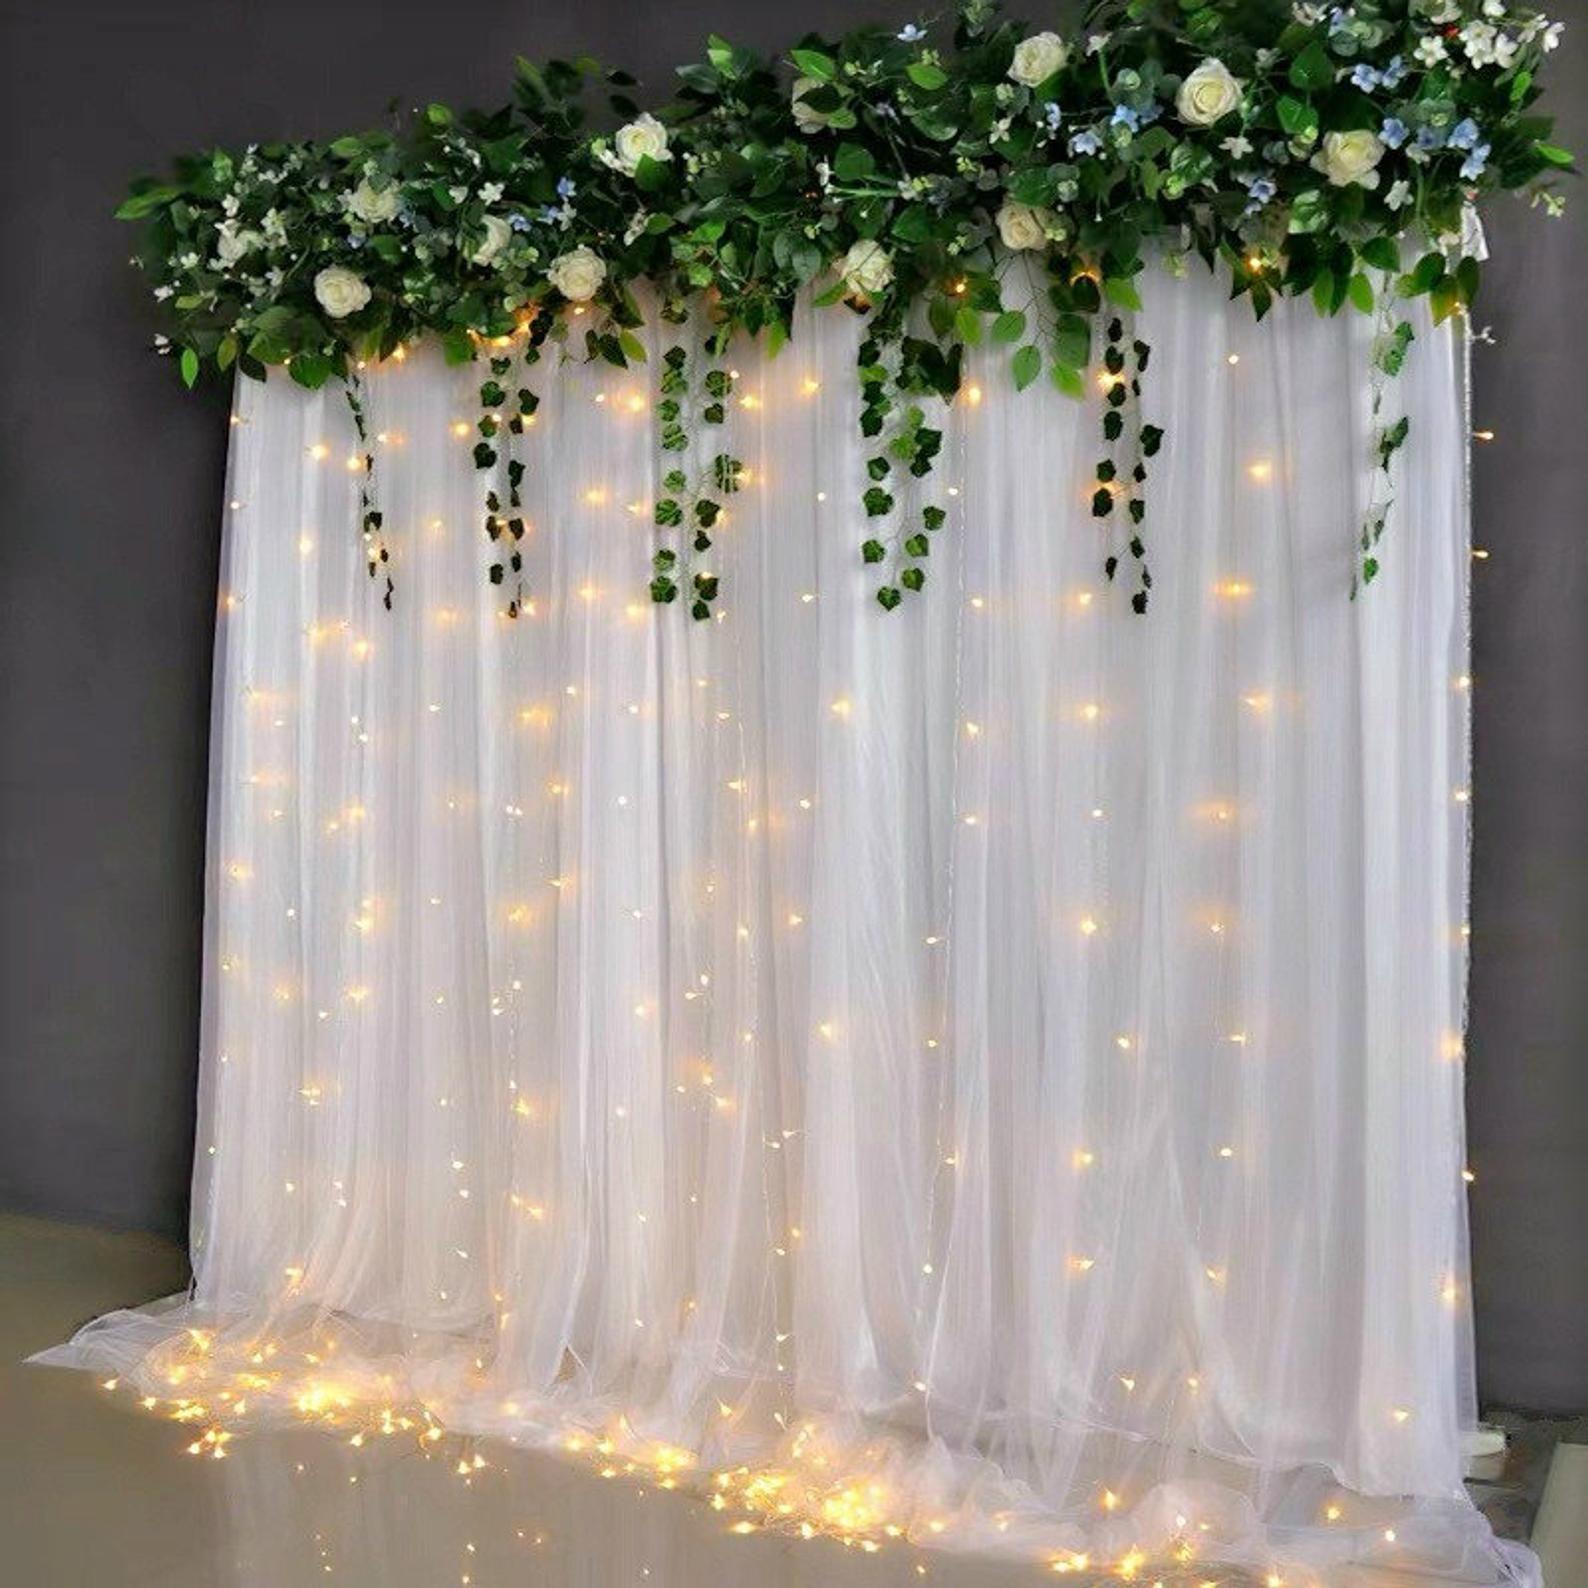 Window Curtain String Lights for Garden Decorations - If you say i do